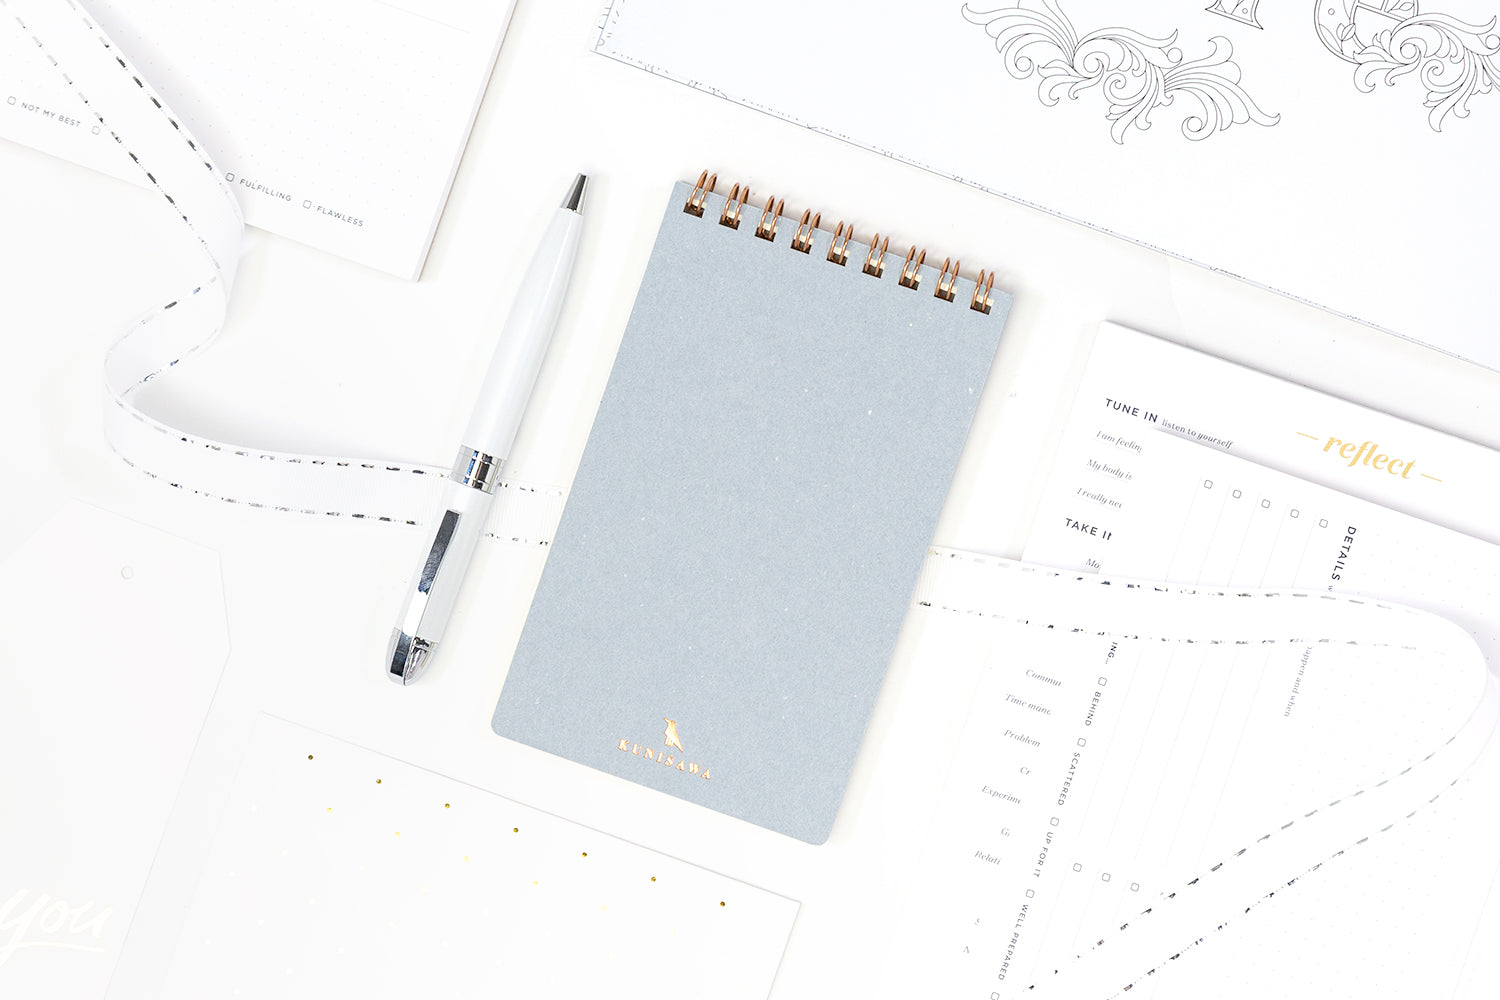 A collection of secret santa gift ideas including a pale blue notepad, a pen, and productivity notepads.